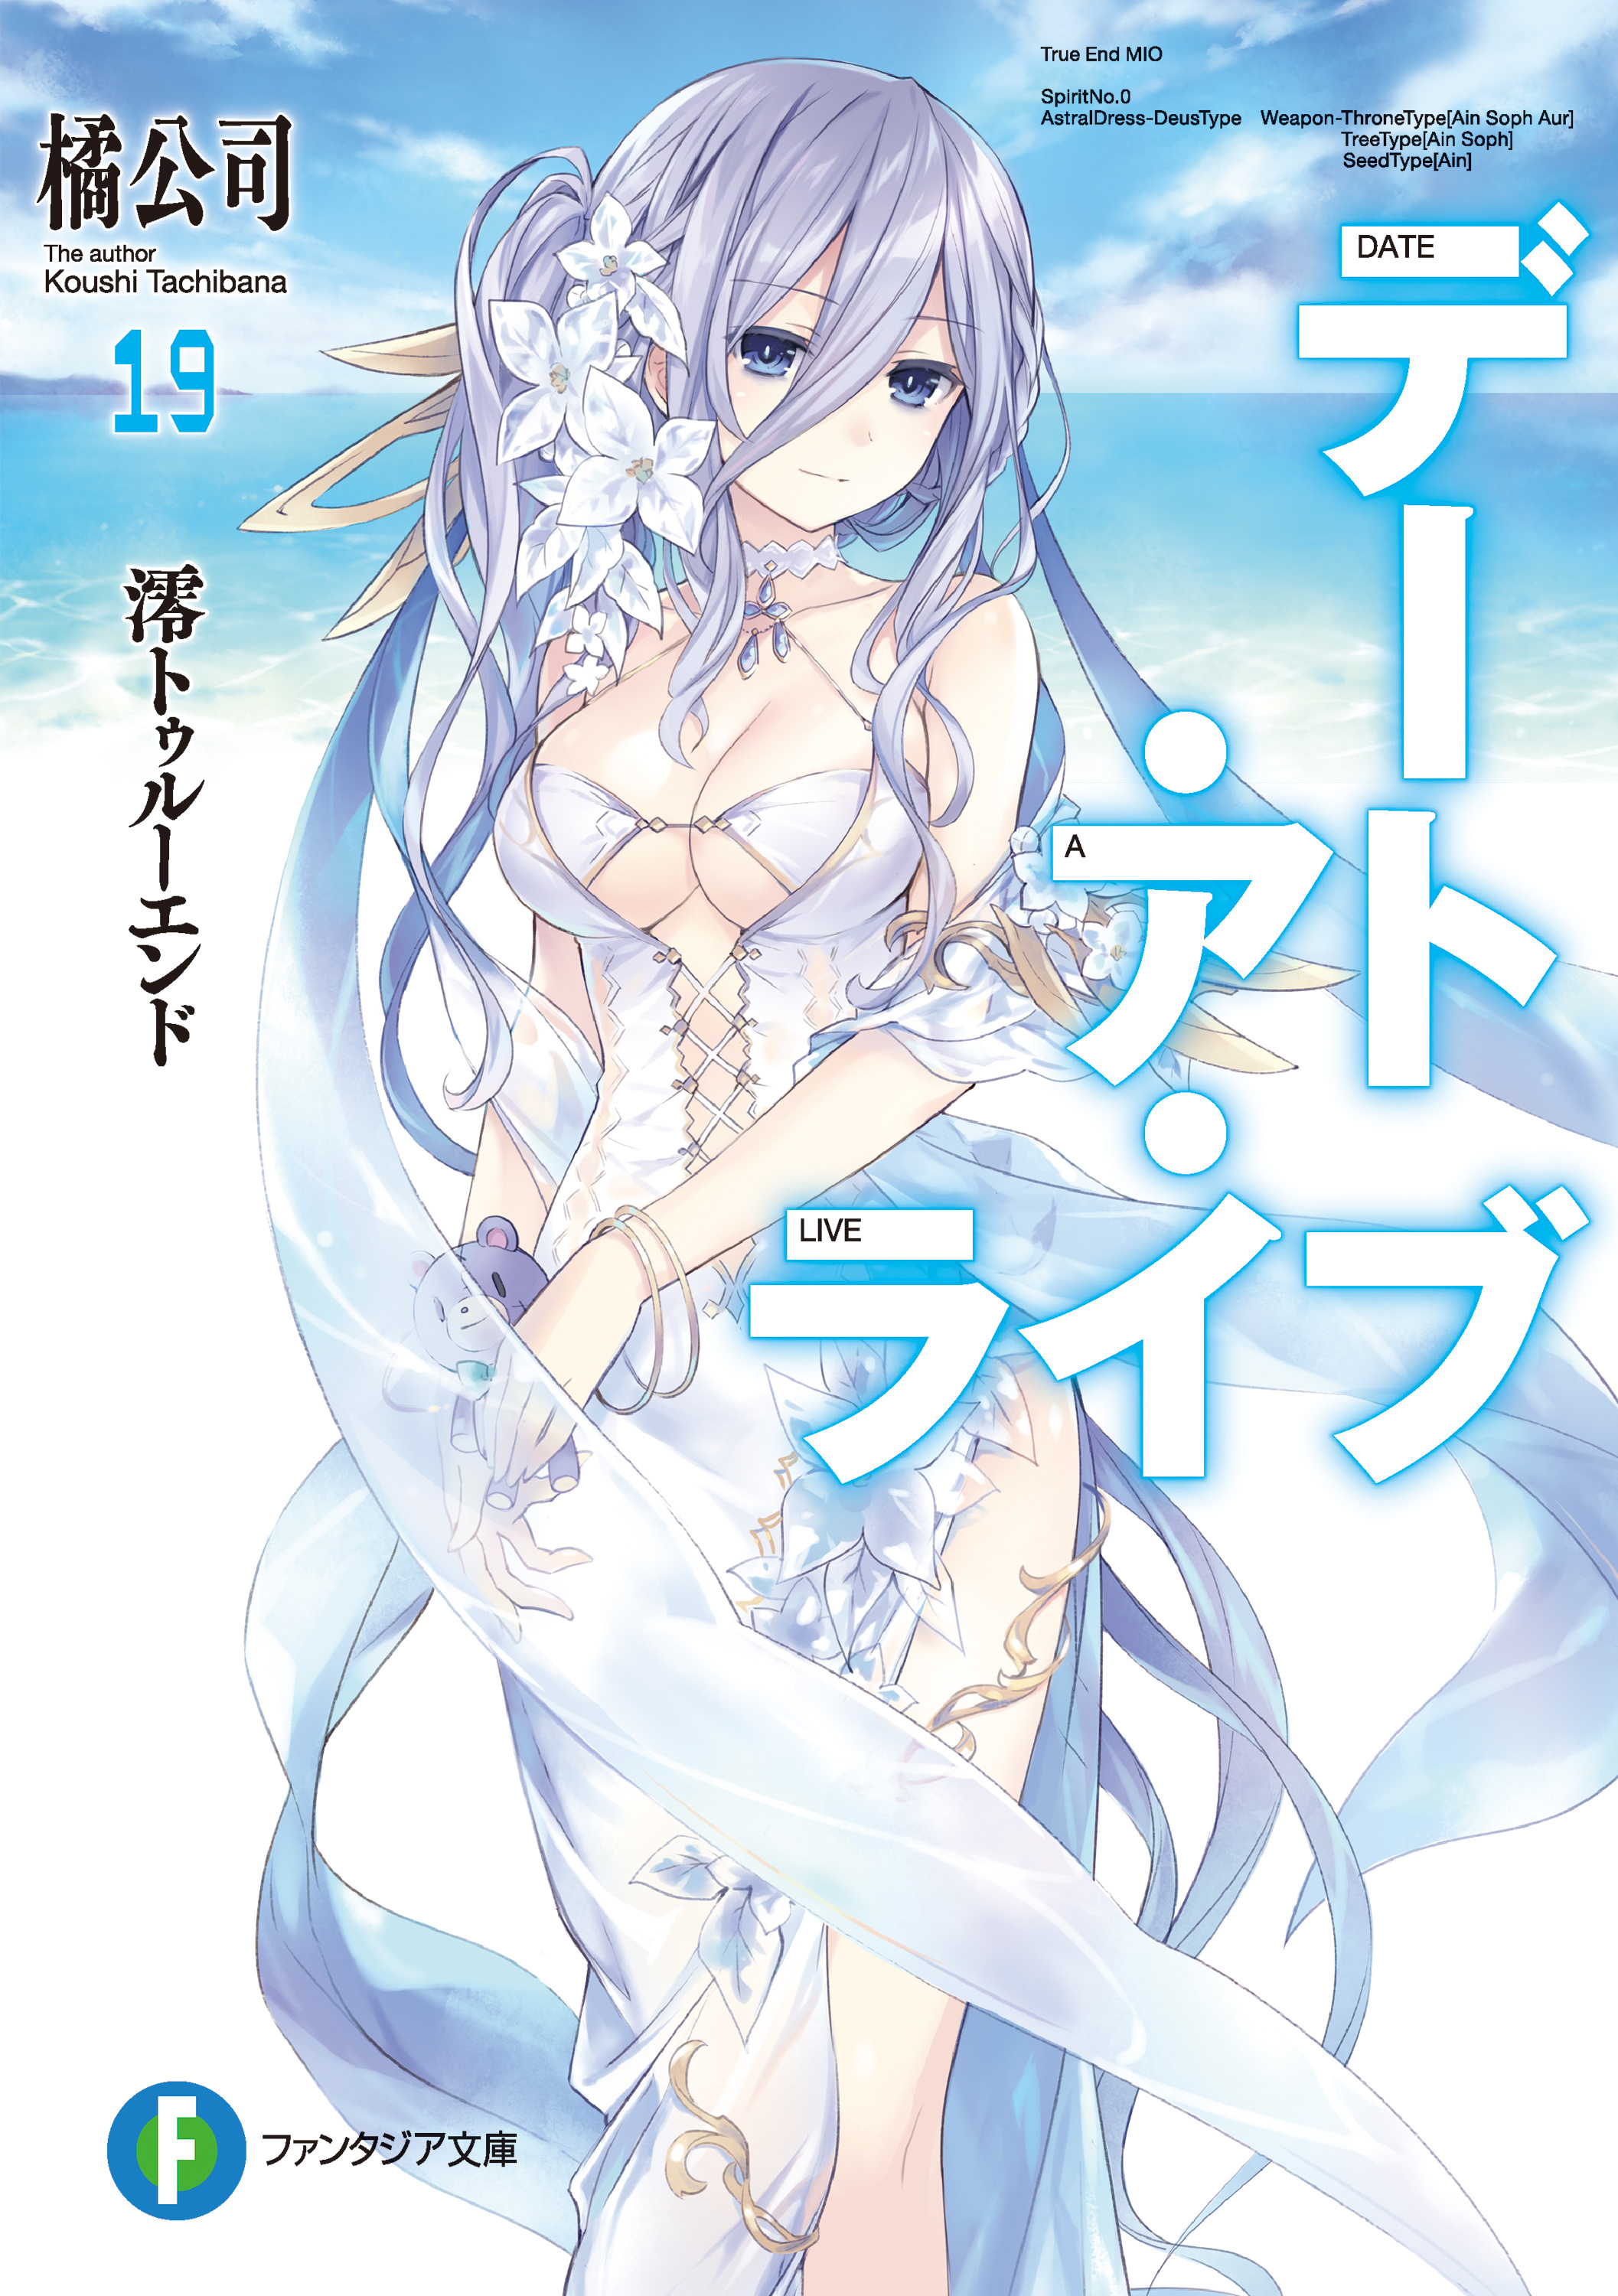 DATE A LIVE All 16 Spirits (LATEST 2019) 